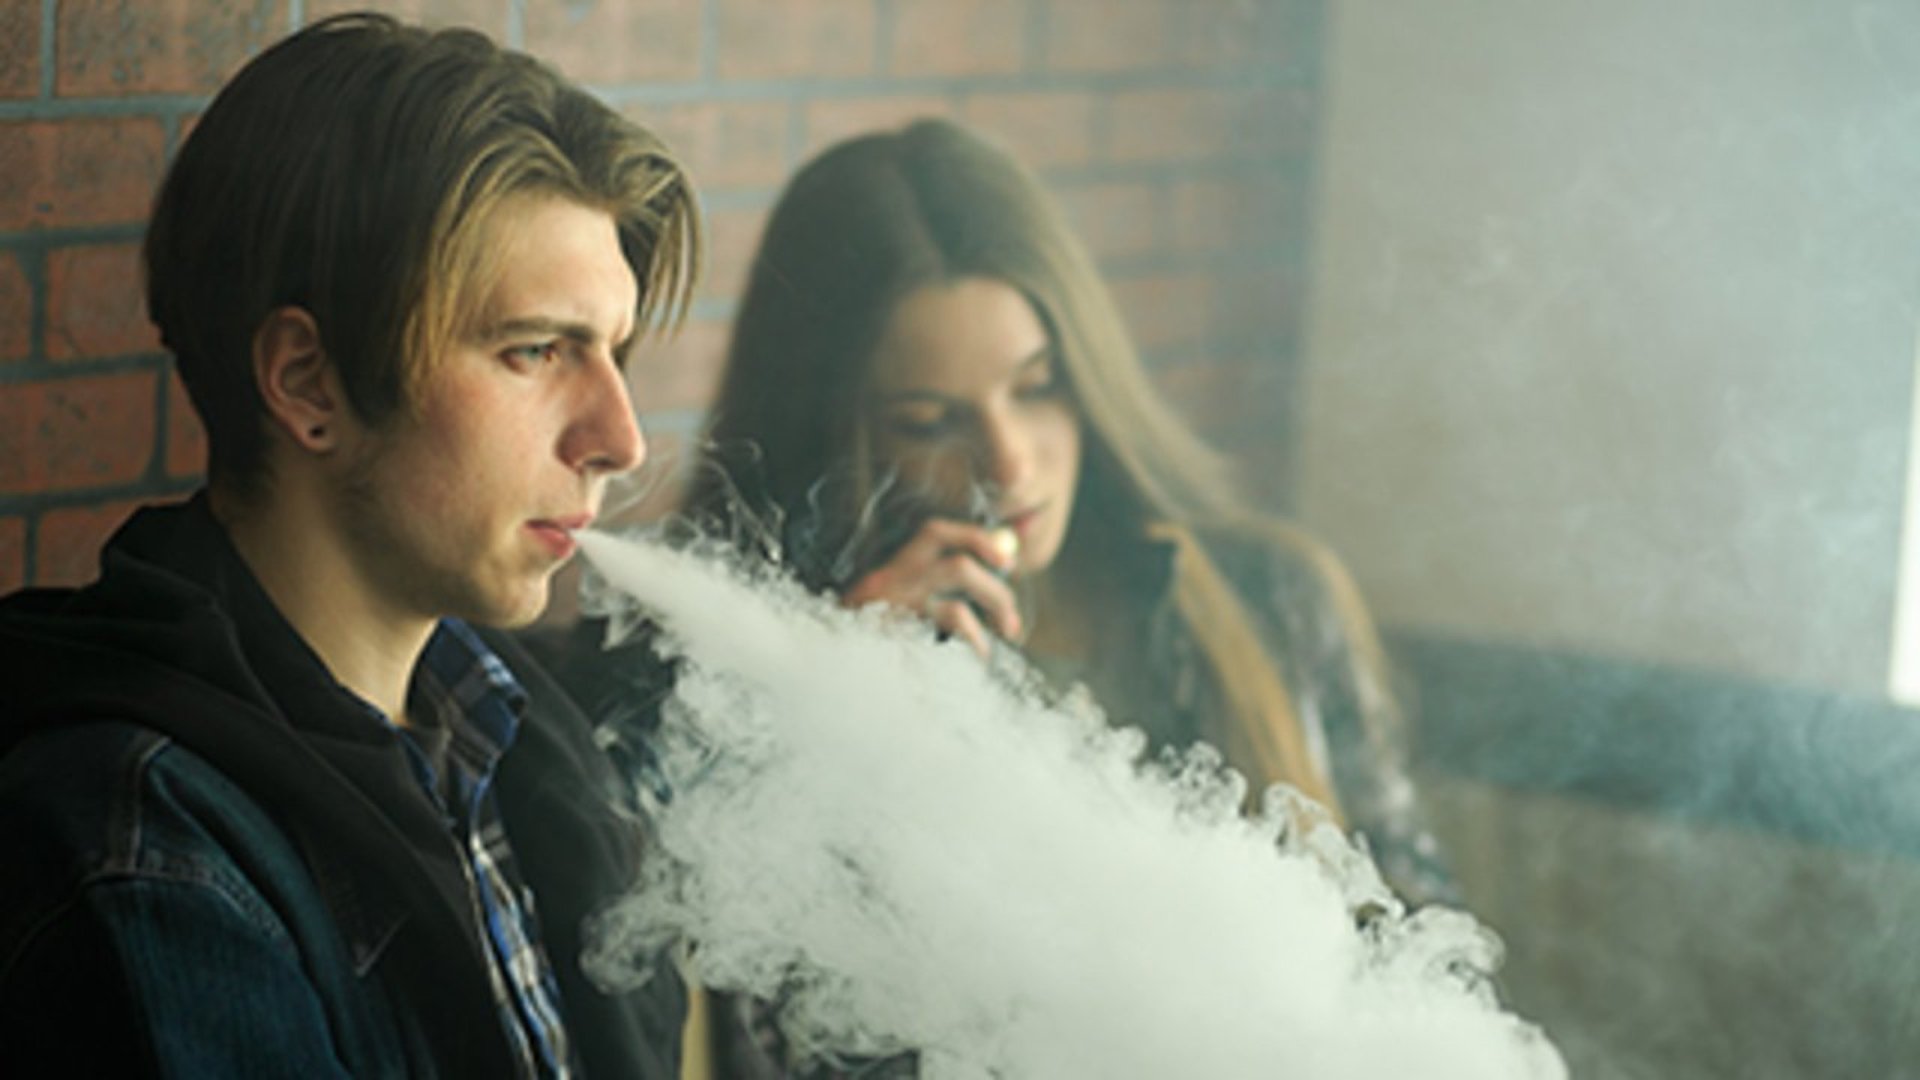 News Picture: For the Young, Vaping & Chronic Stress Often Go Together